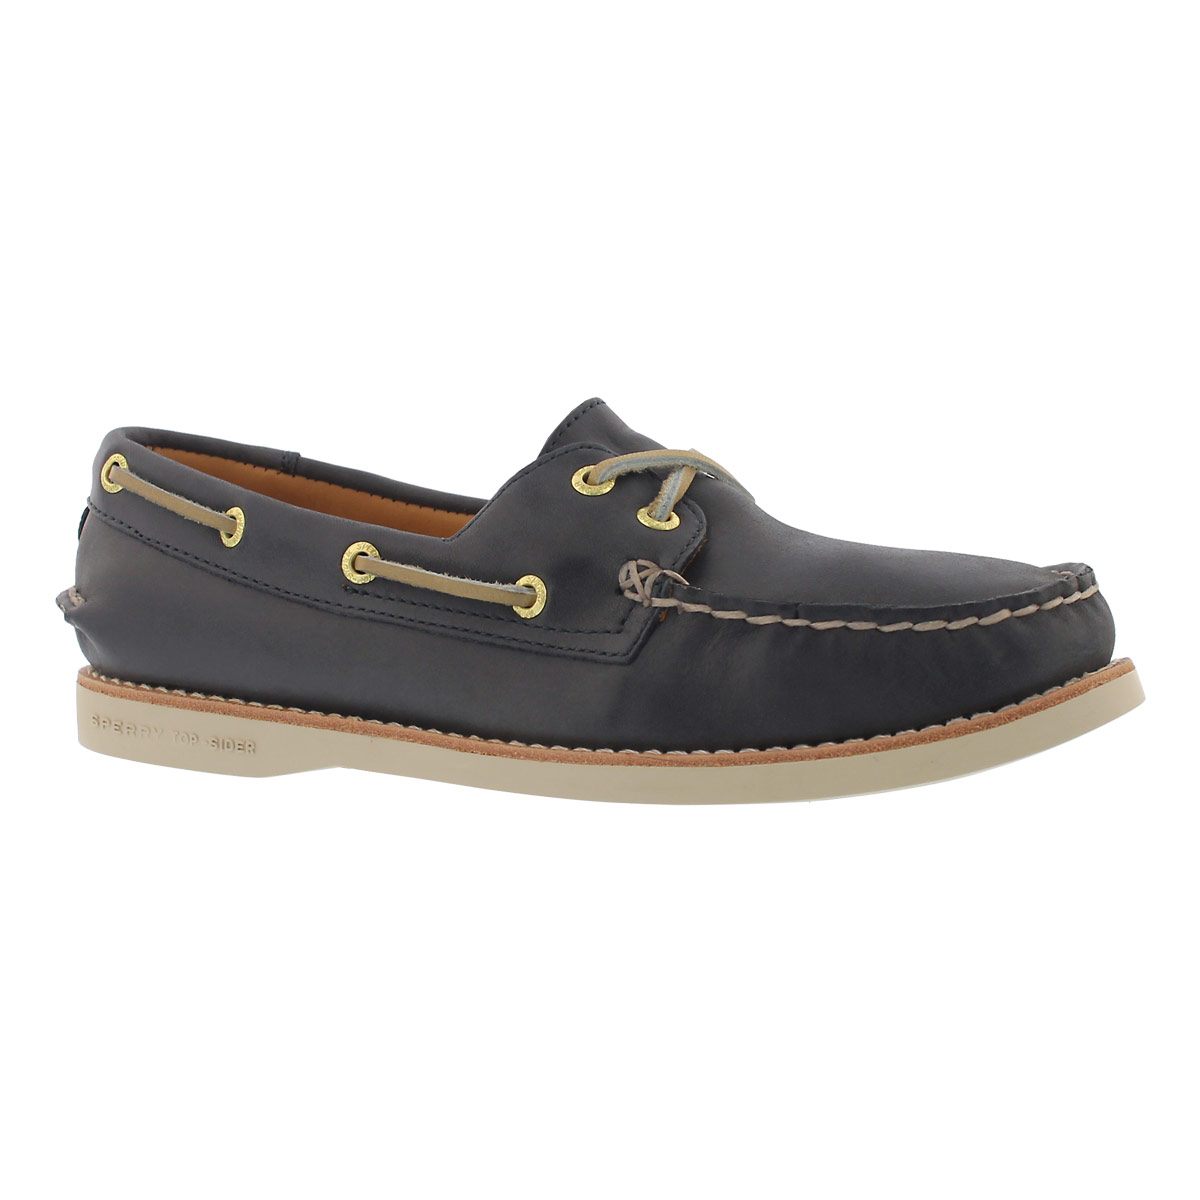 GOLD CUP A/O navy boat shoes 